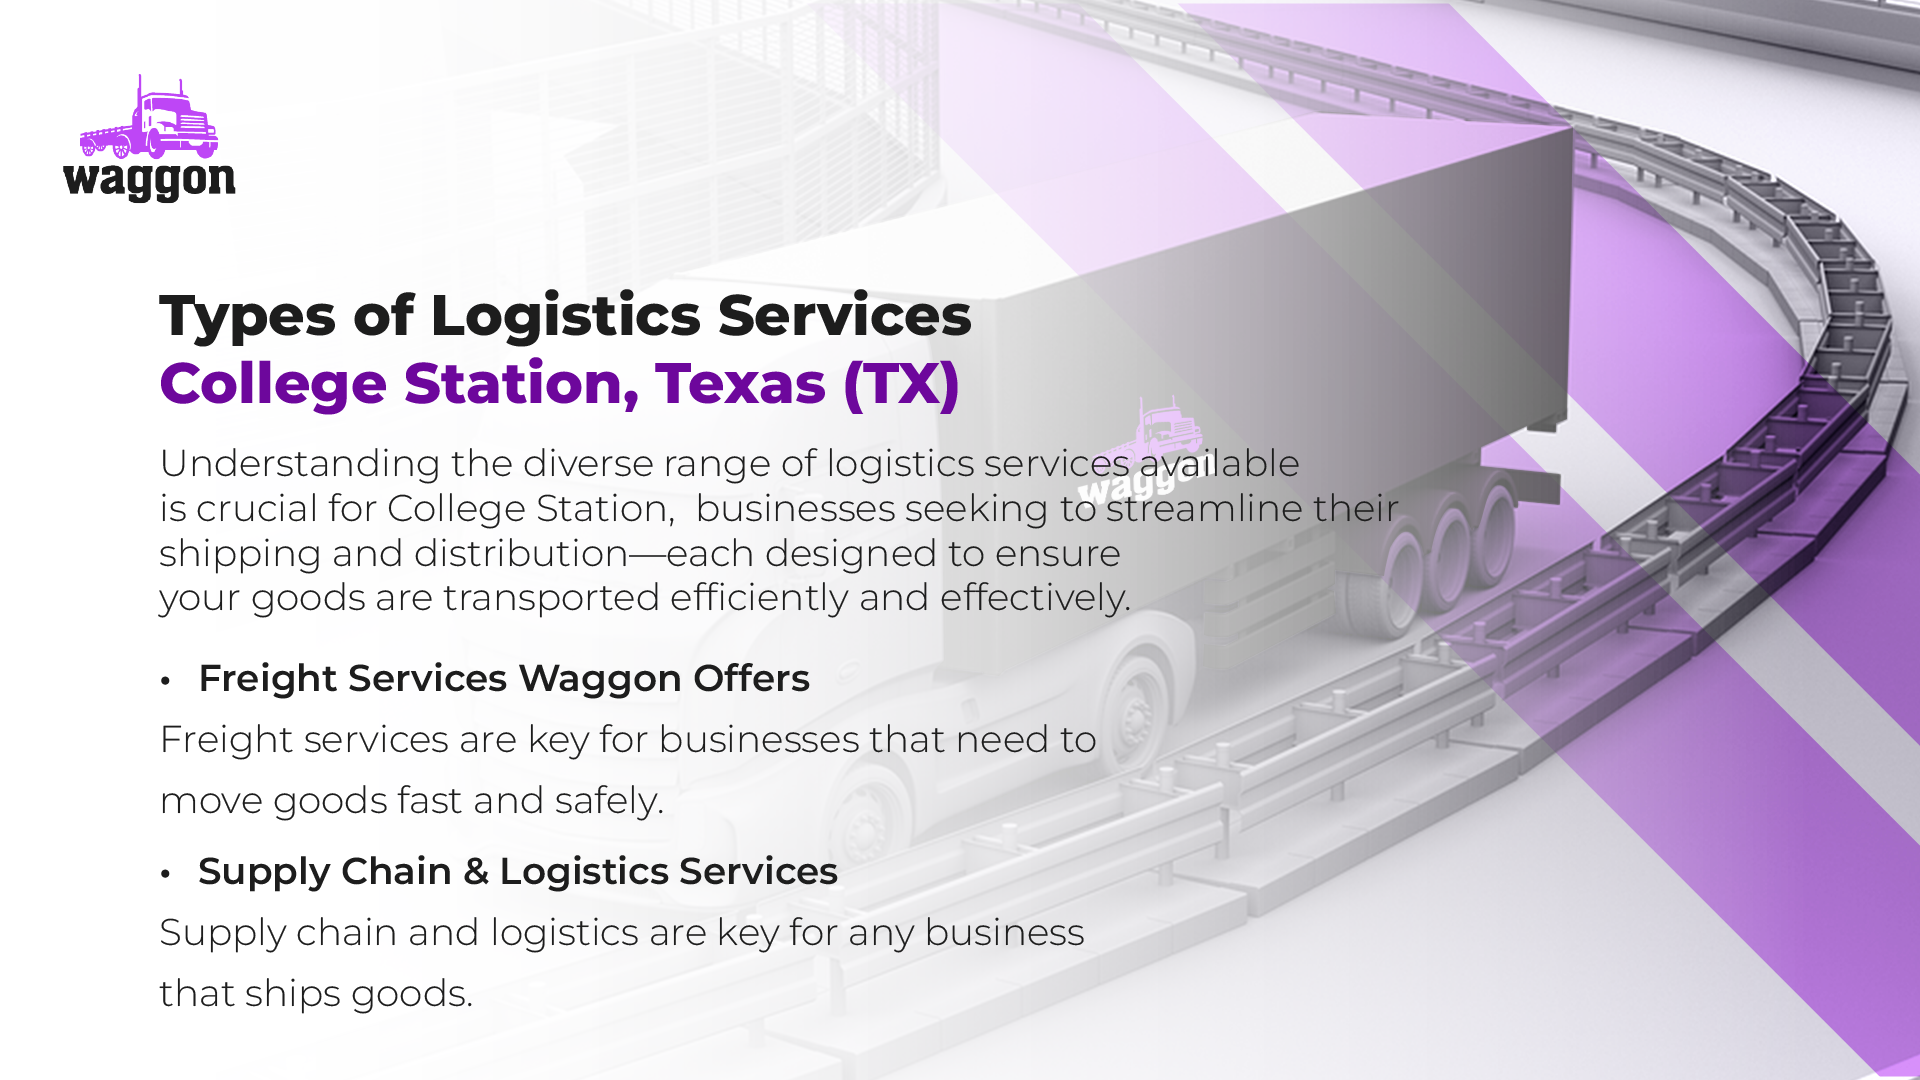 Types of Logistics Services in College Station, Texas (TX)